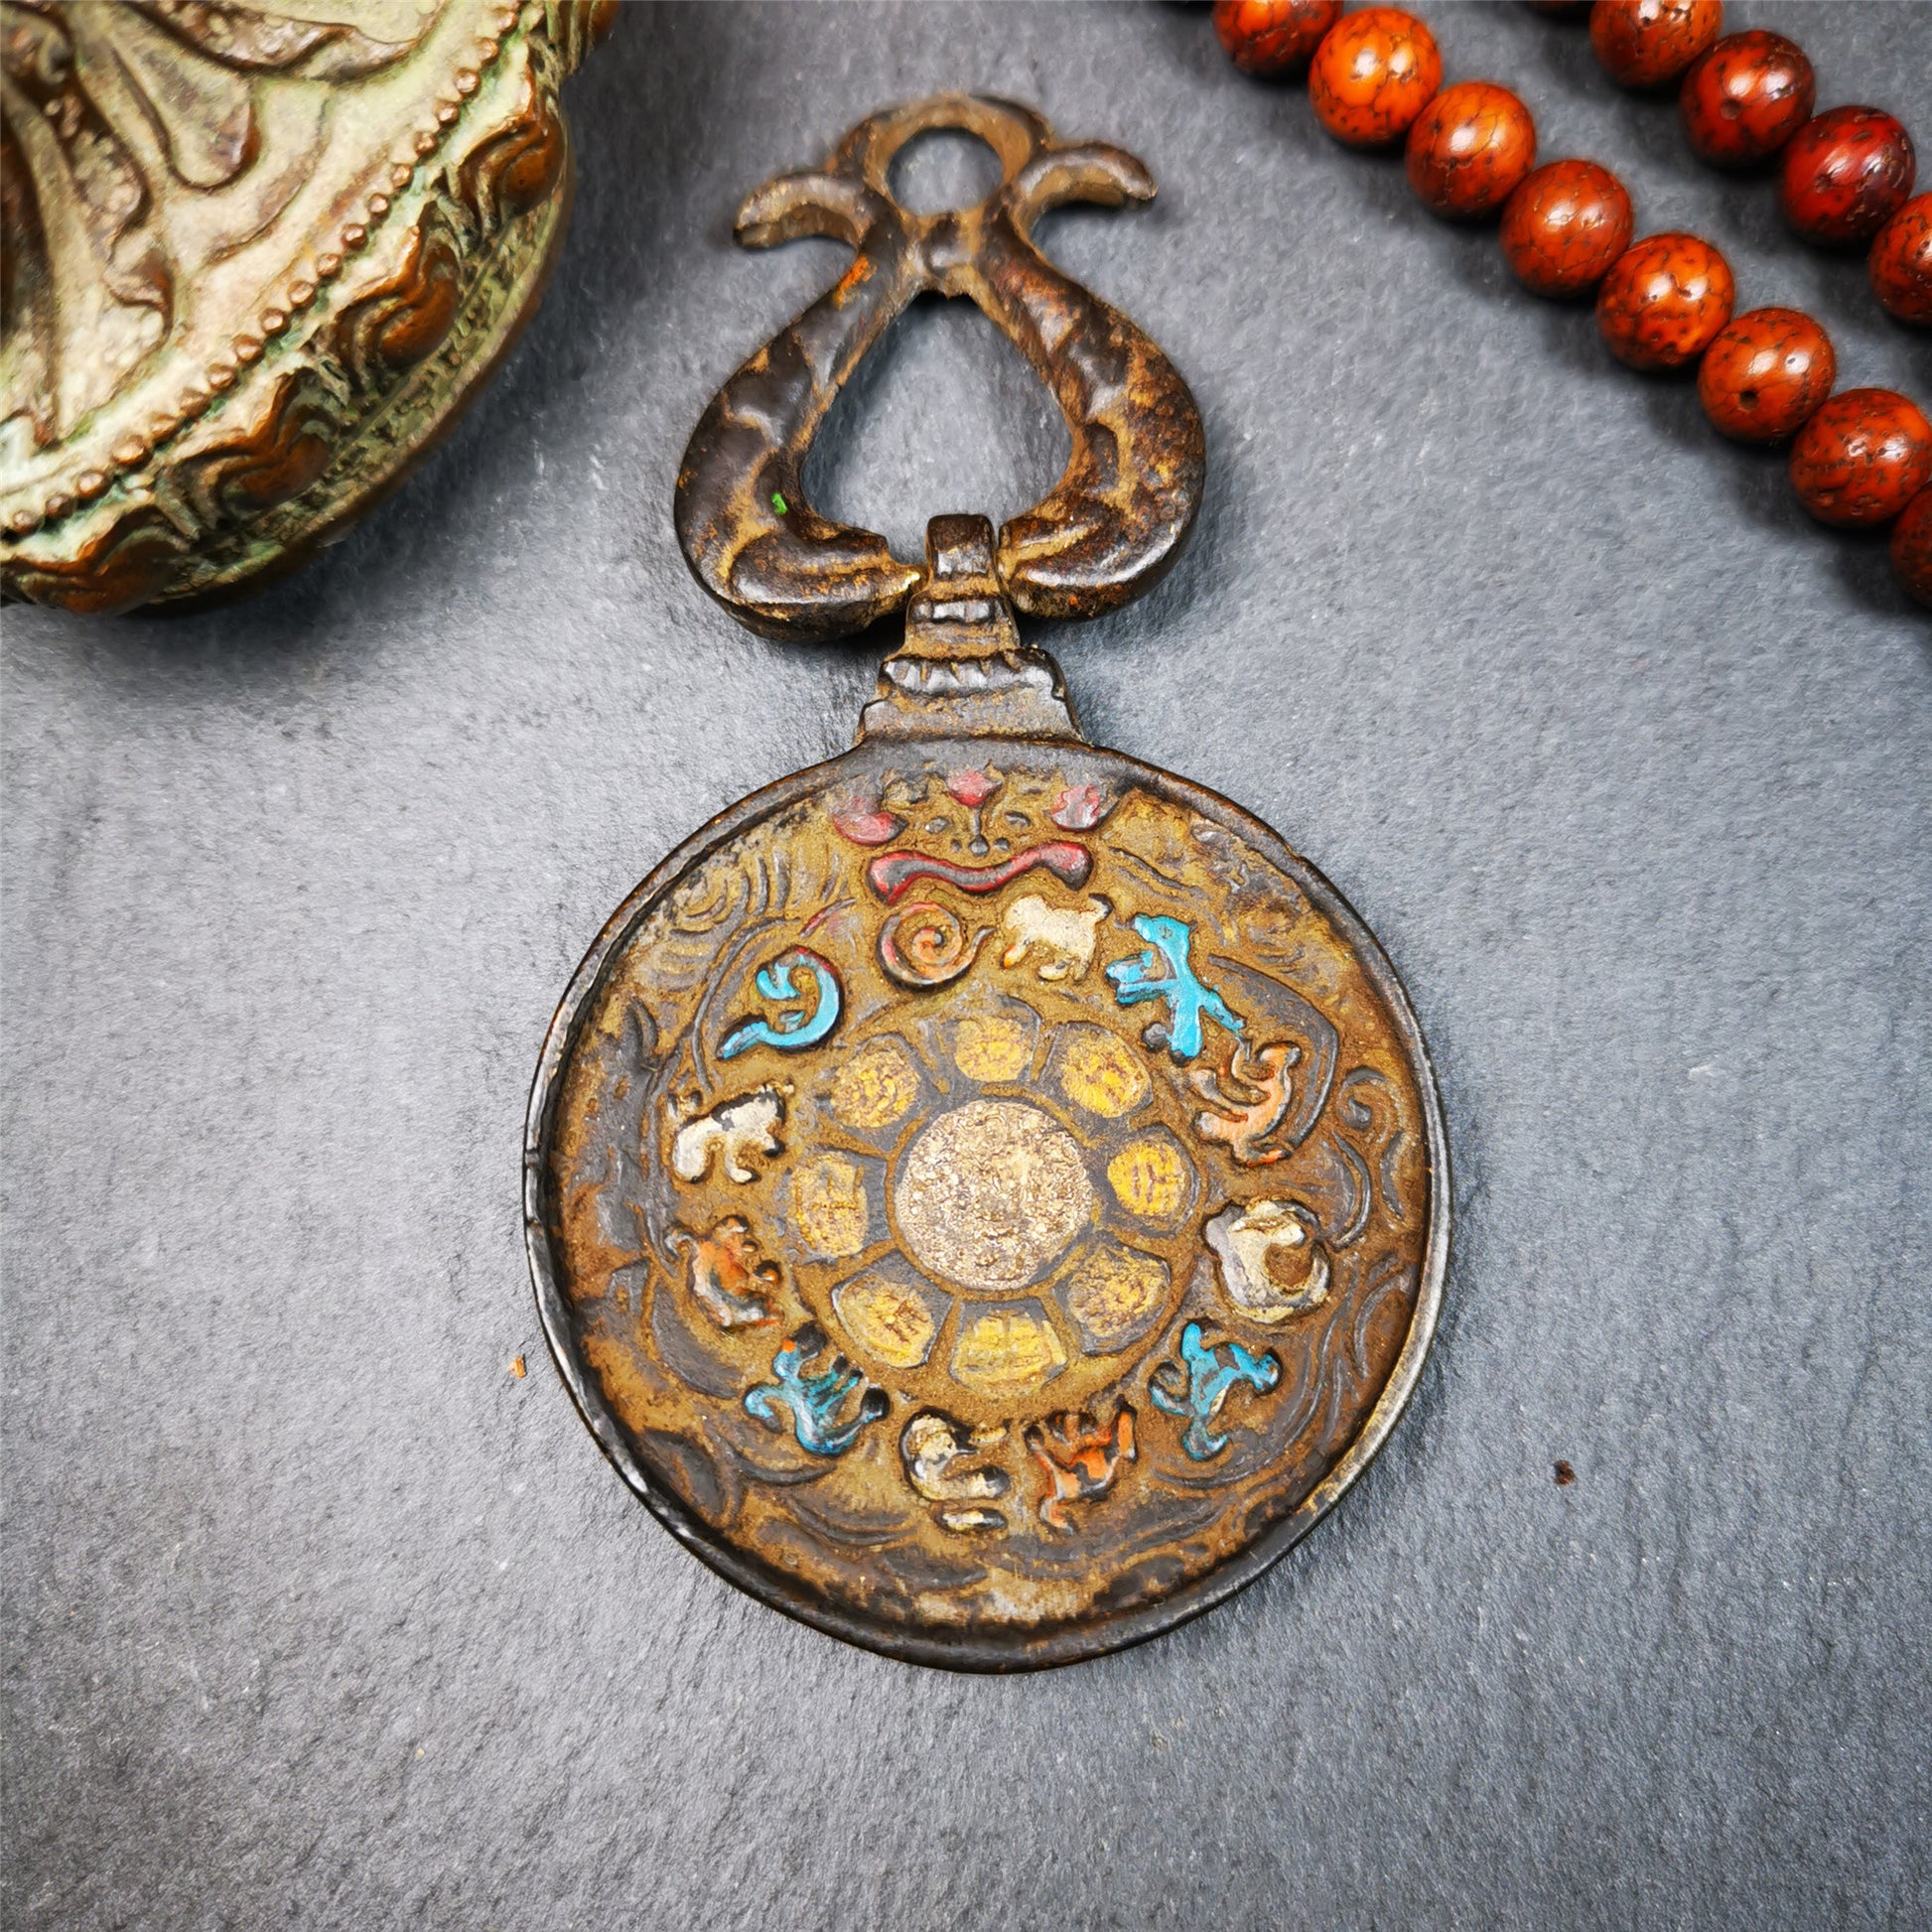 This unique Guru Rinpoche Melong Amulet was collected from Goinqen Monastery,about 40 years old,consecrated and blessed by lama. It is made of thokcha,the top is a double fish hanging ring,the front pattern is Tibetan Budhist calendar symbol - SIPAHO(srid pa ho),and the back is Guru Rinpoche. You can make it into pendant or keychain, or just put it on your desk,as an ornament.